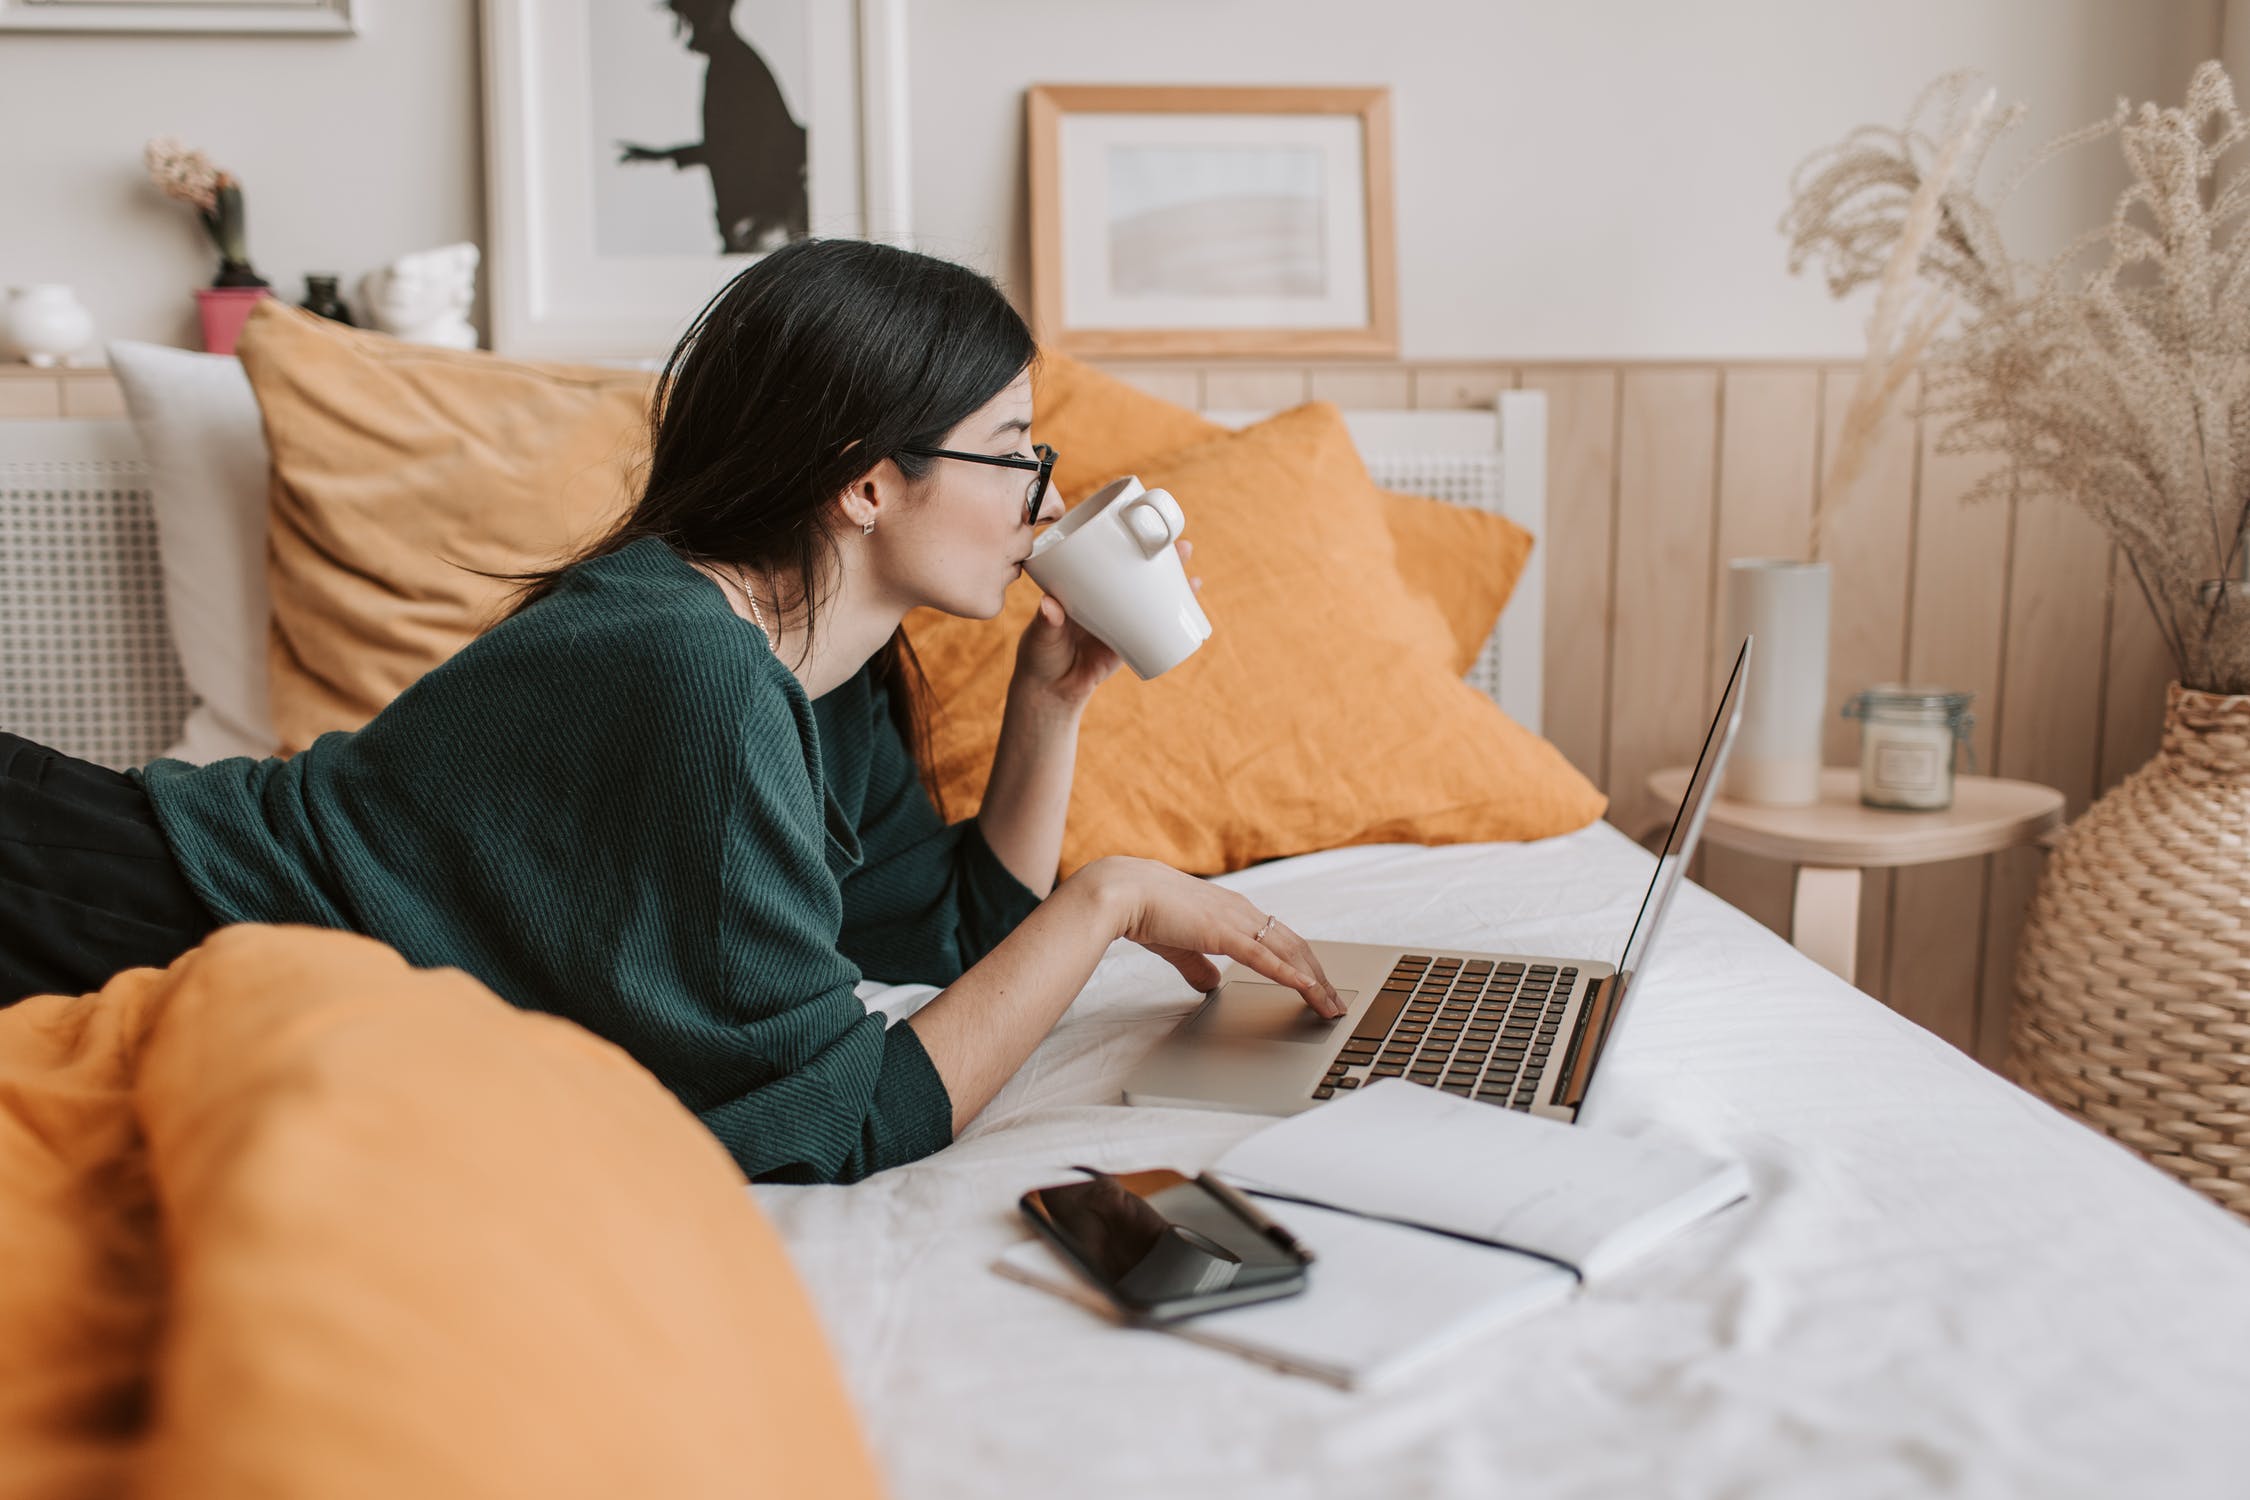 Girl sipping coffee while working on her laptop in bed. how to find your style.